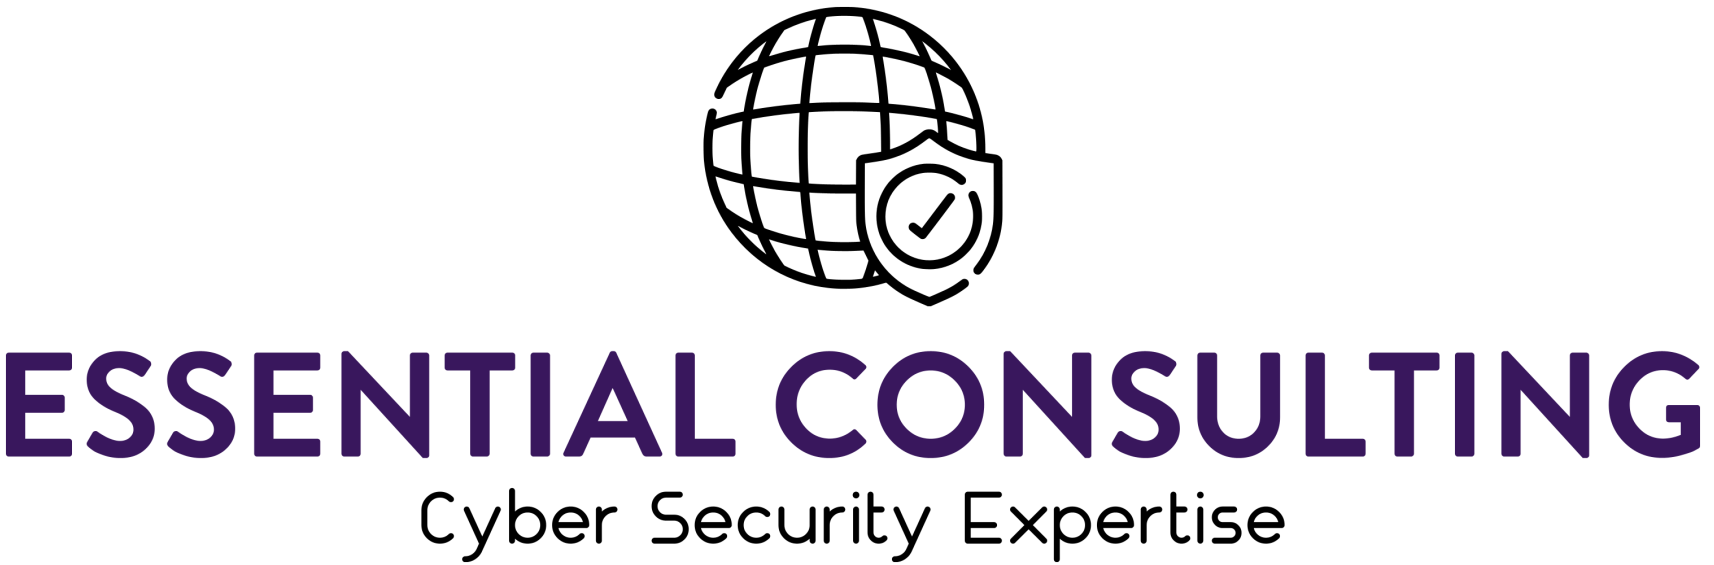 a logo for essential consulting , a cyber security expertise company .